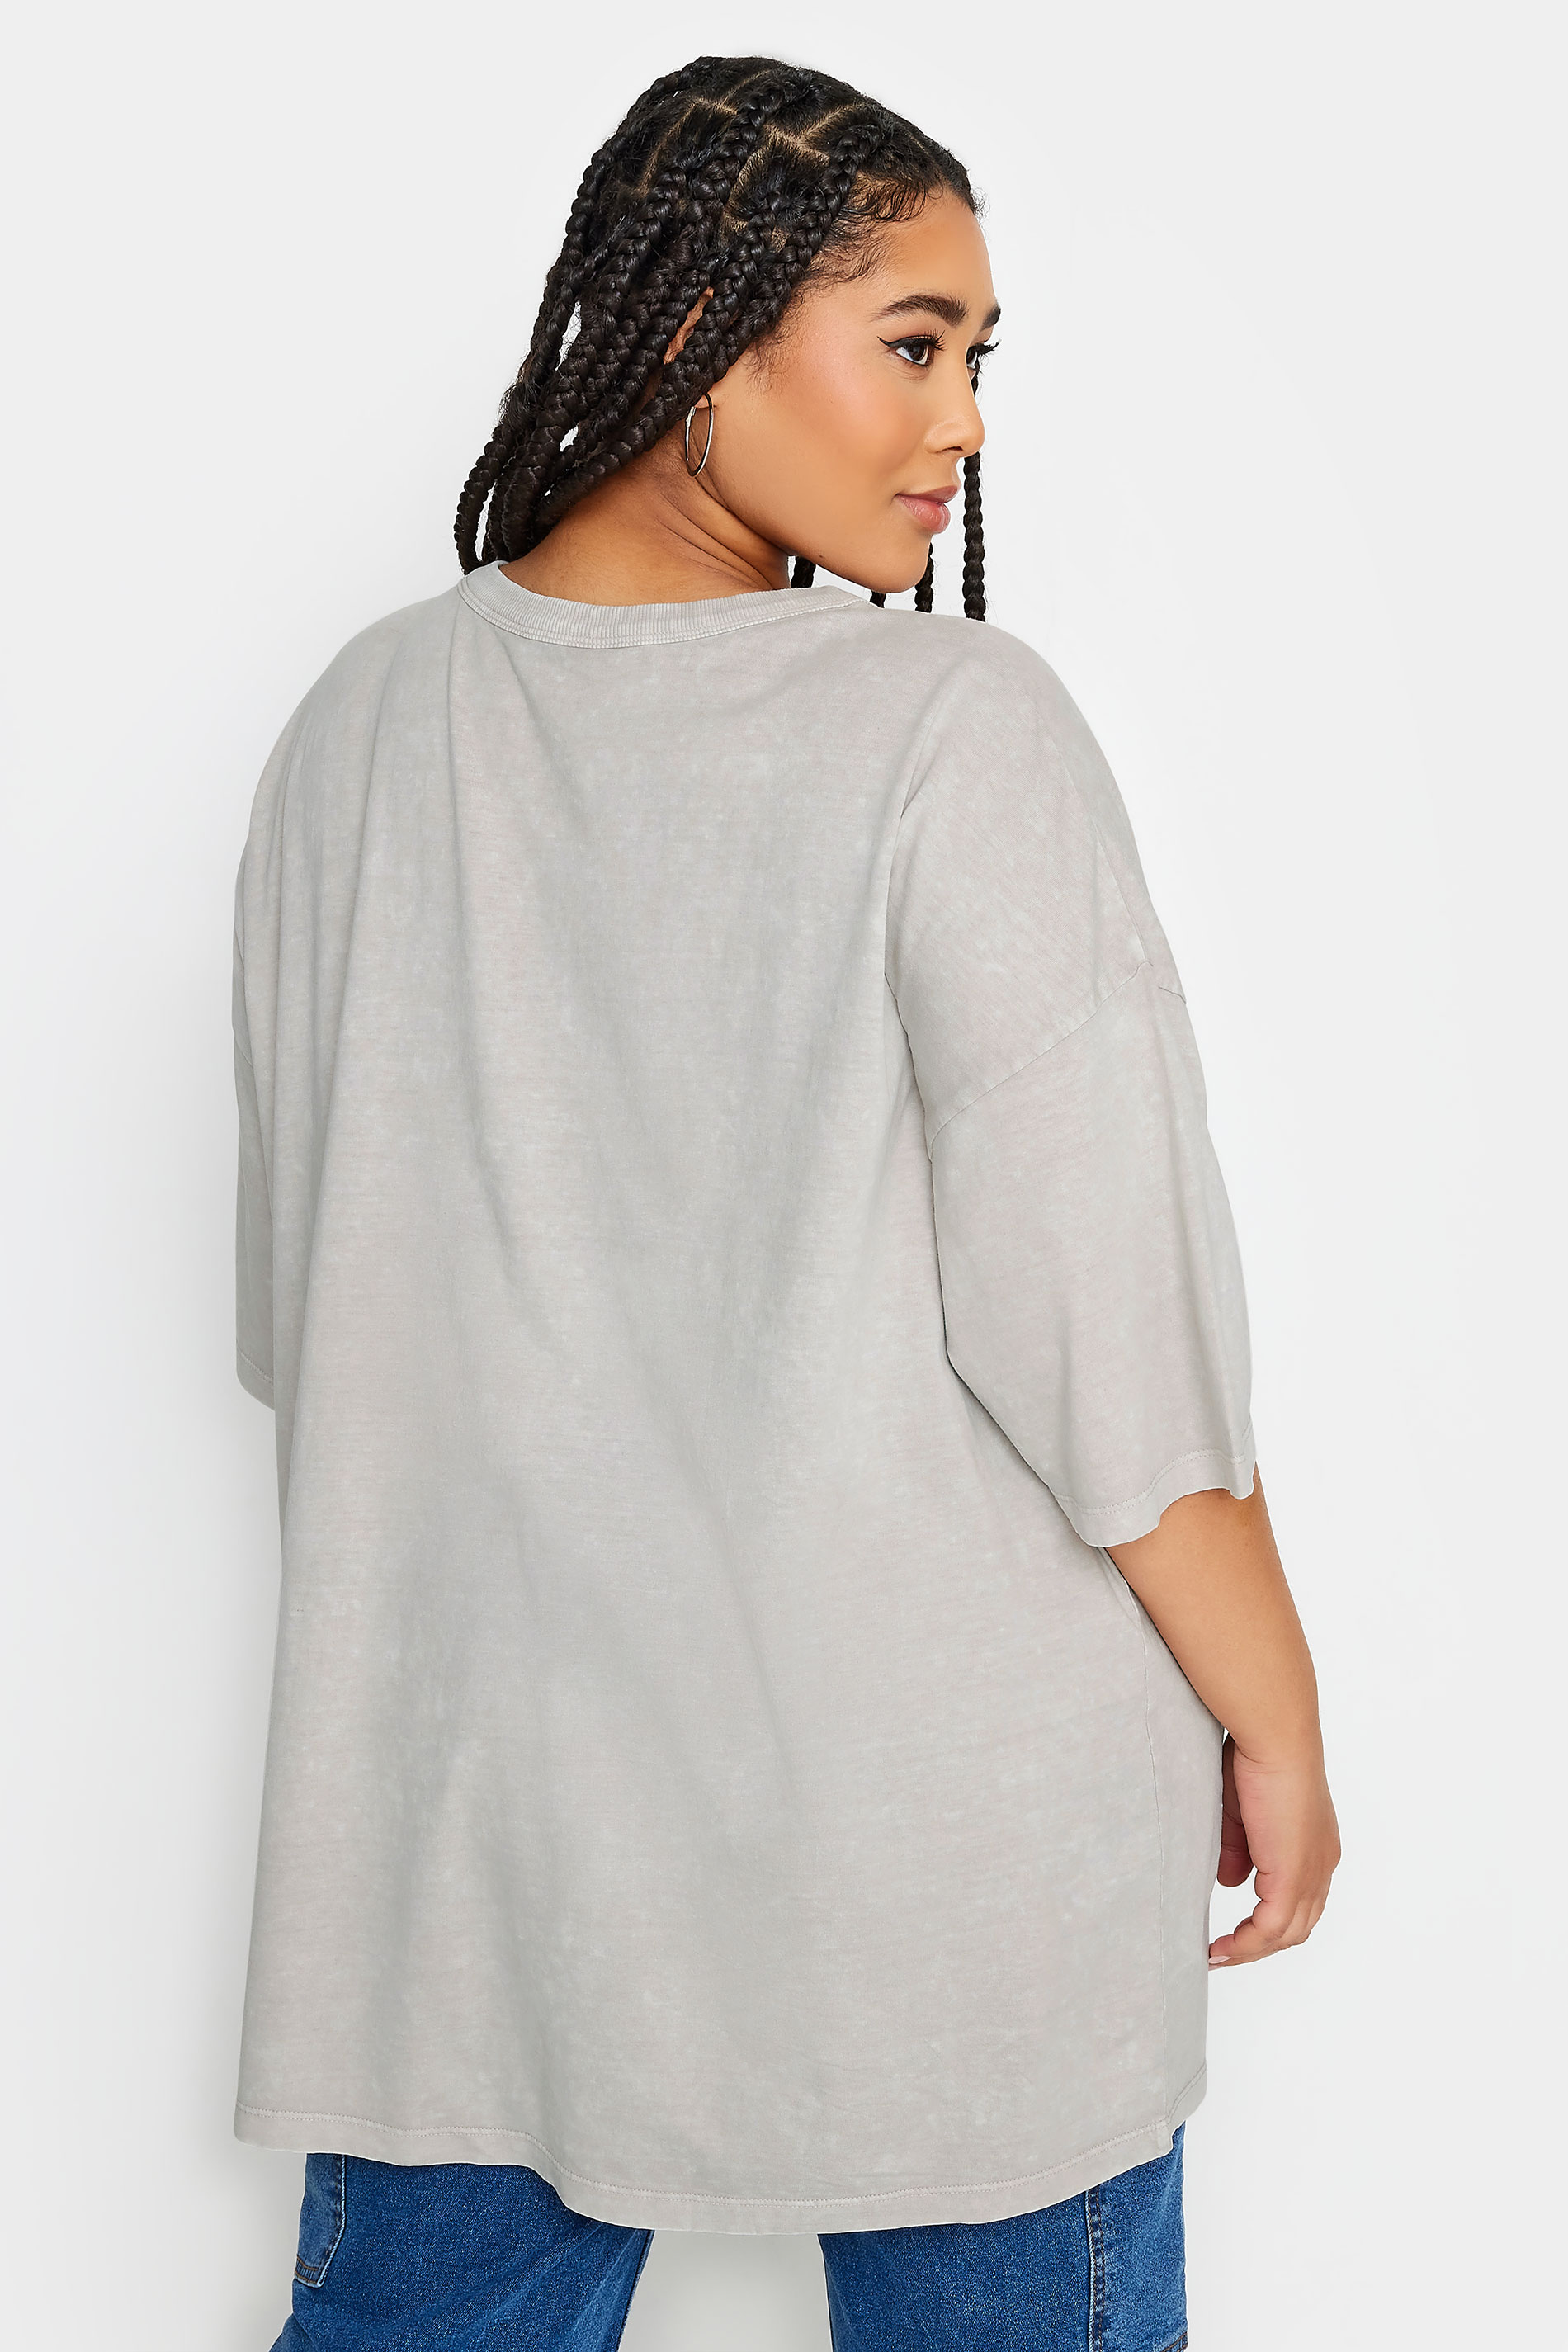 YOURS Plus Size Grey 'Happiness' Printed Oversized T-Shirt | Yours Clothing 2